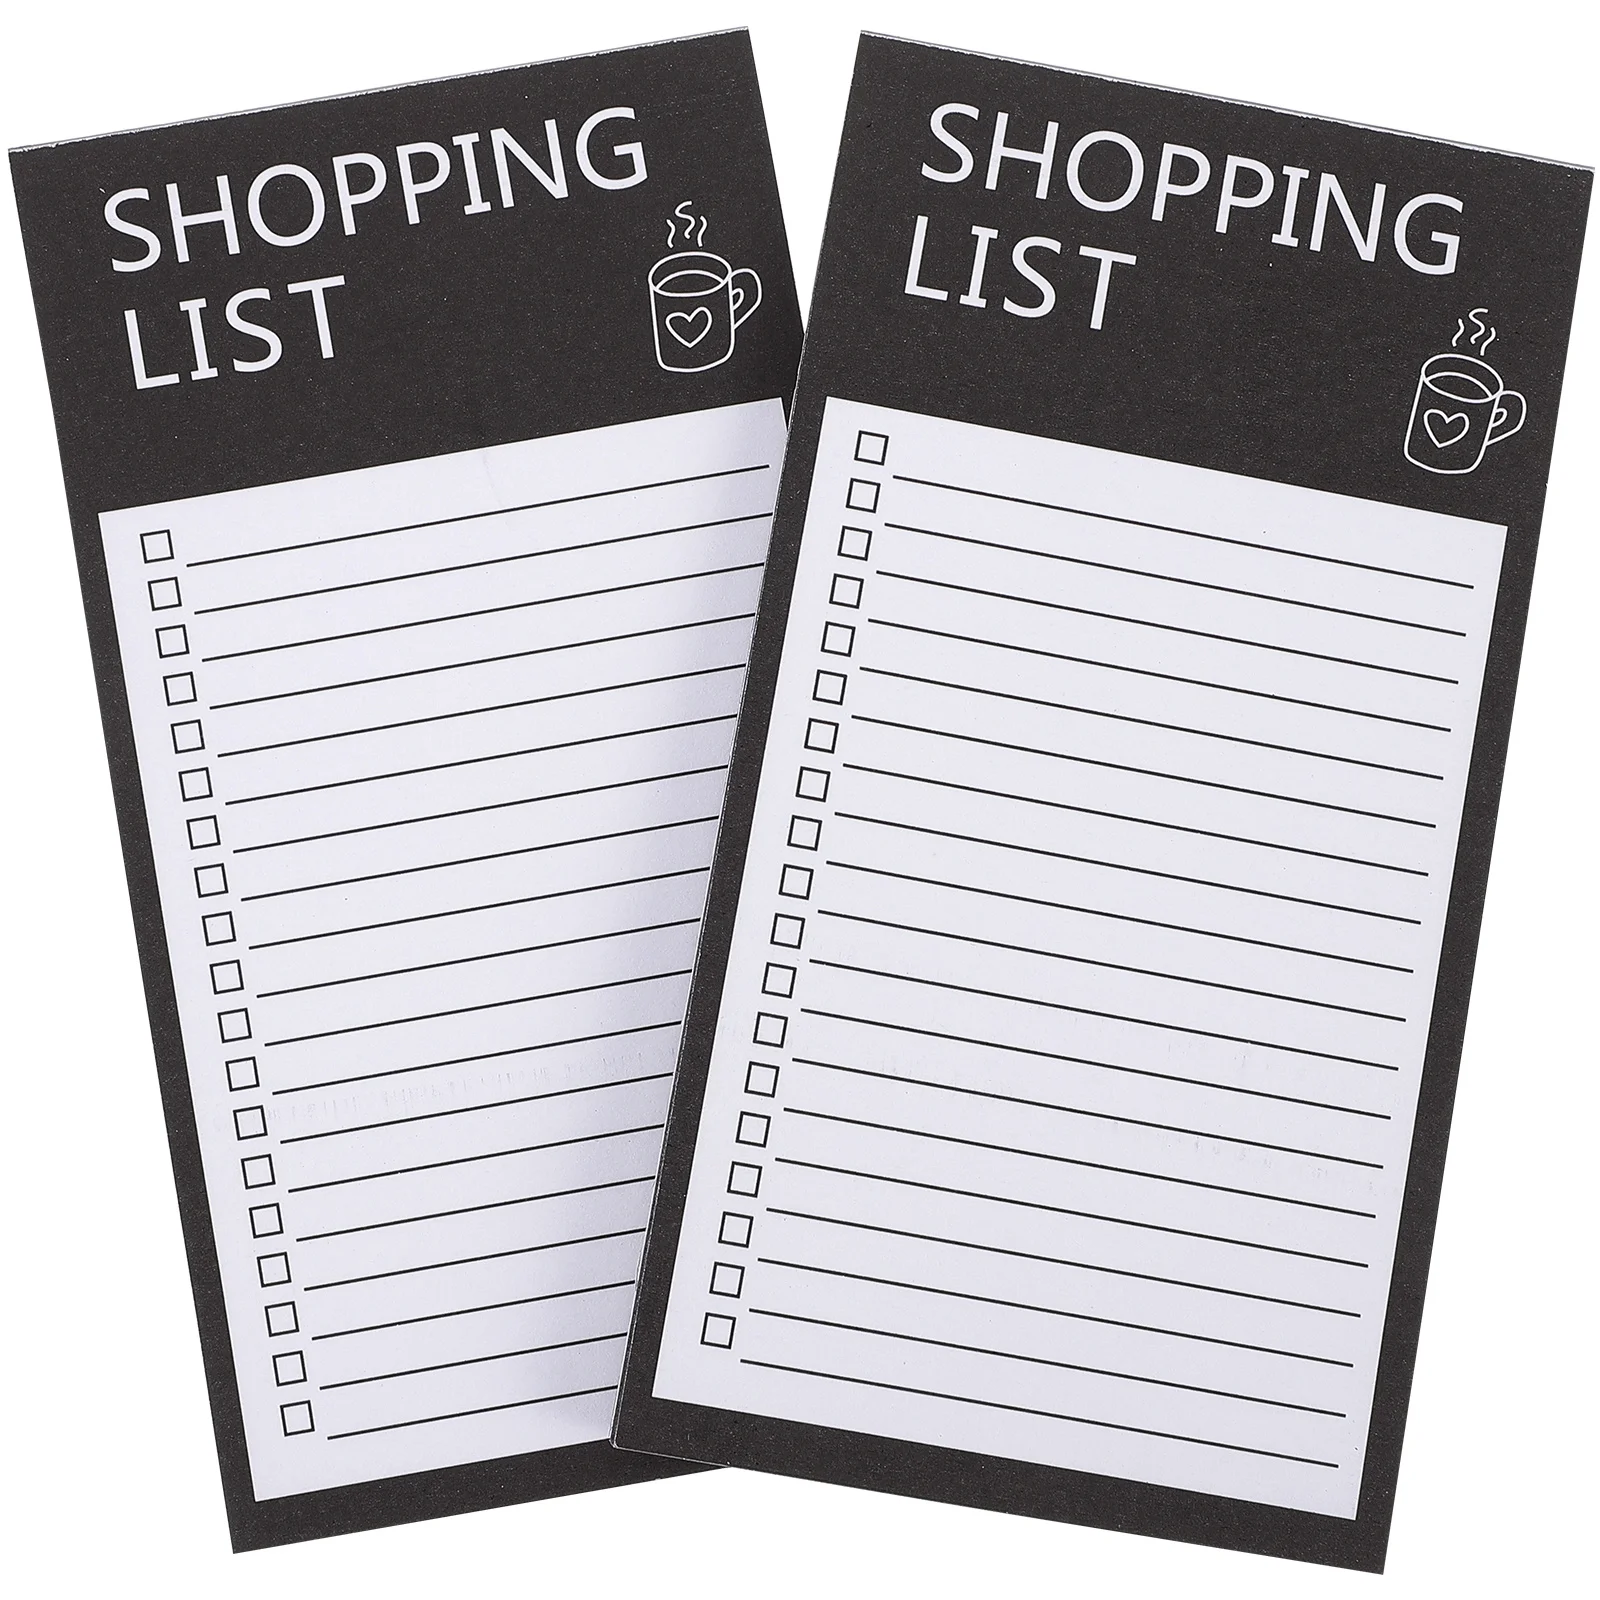 Fridge Magnetic Notepads Memo Pads To Do List Shopping List Planner Grocery Sticker Message Board Notes Planning Notebook 2 books of grocery list planning pad convenient shopping list planner notepad magnetic sticky notes fridge shopping list pad